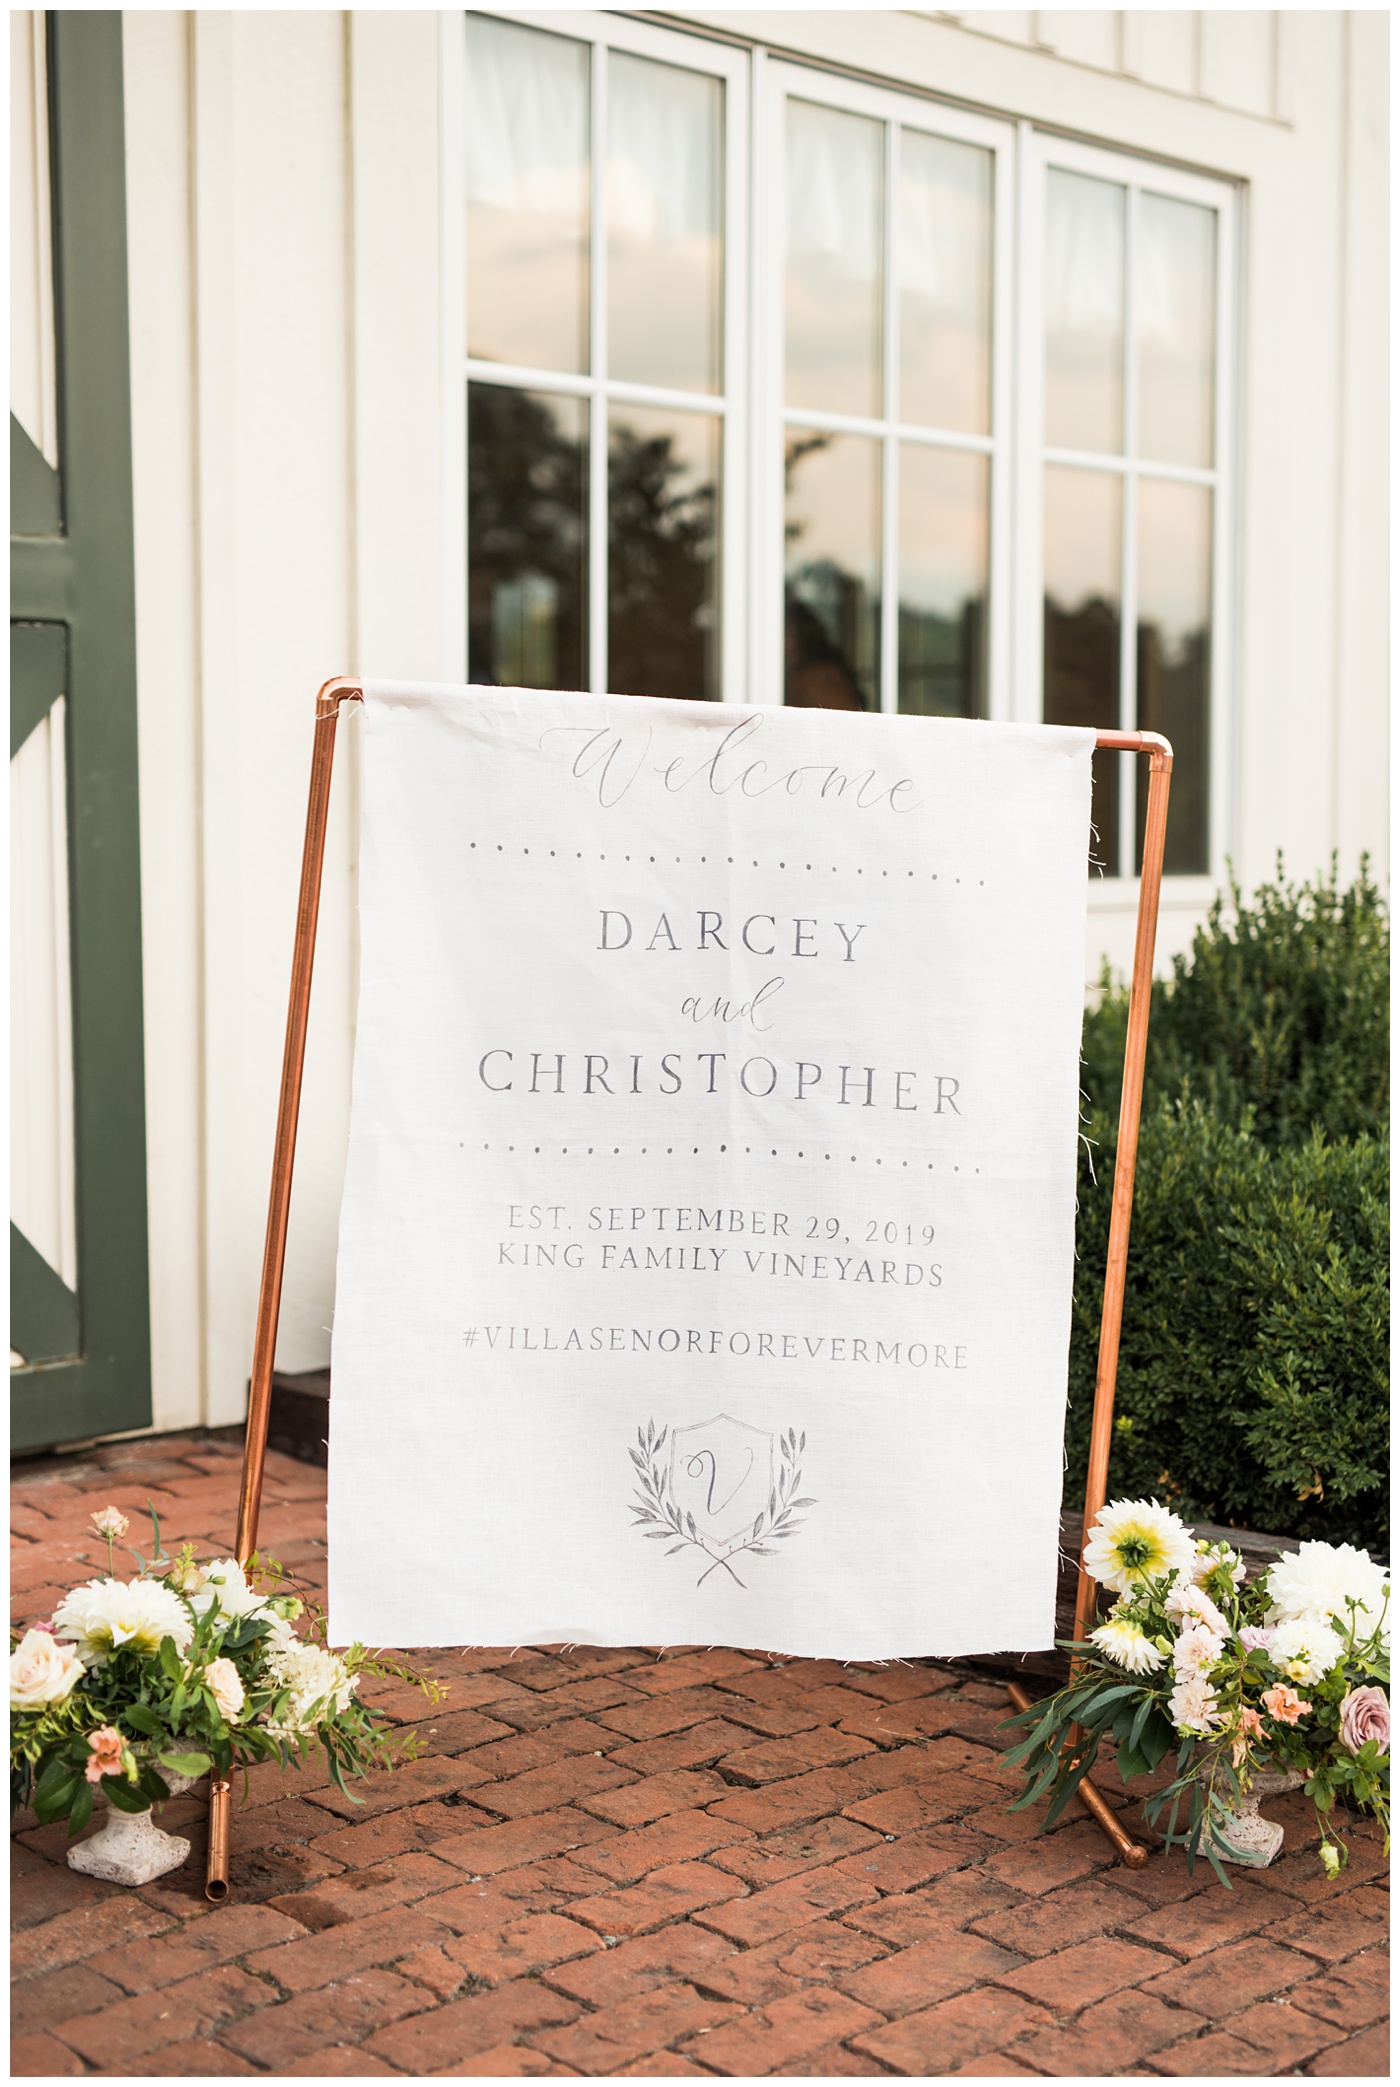 Welcome sign for wedding day at King Family Vineyard in Charlottesville VA